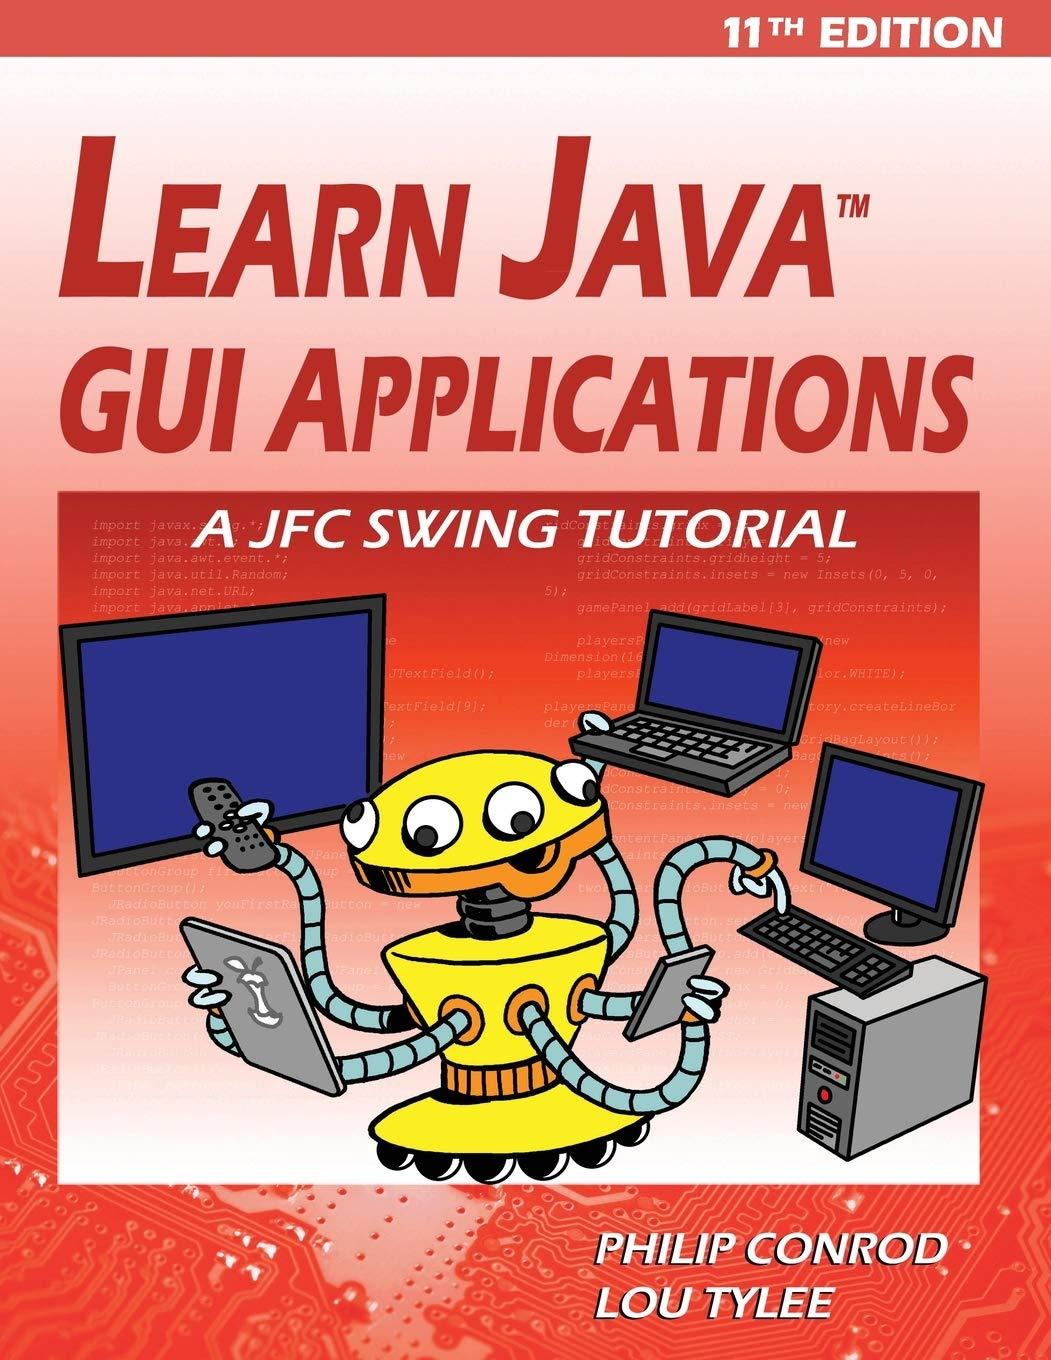 learn java gui applications a jfc swing tutorial 11th edition philip conrod, lou tylee 1937161900,